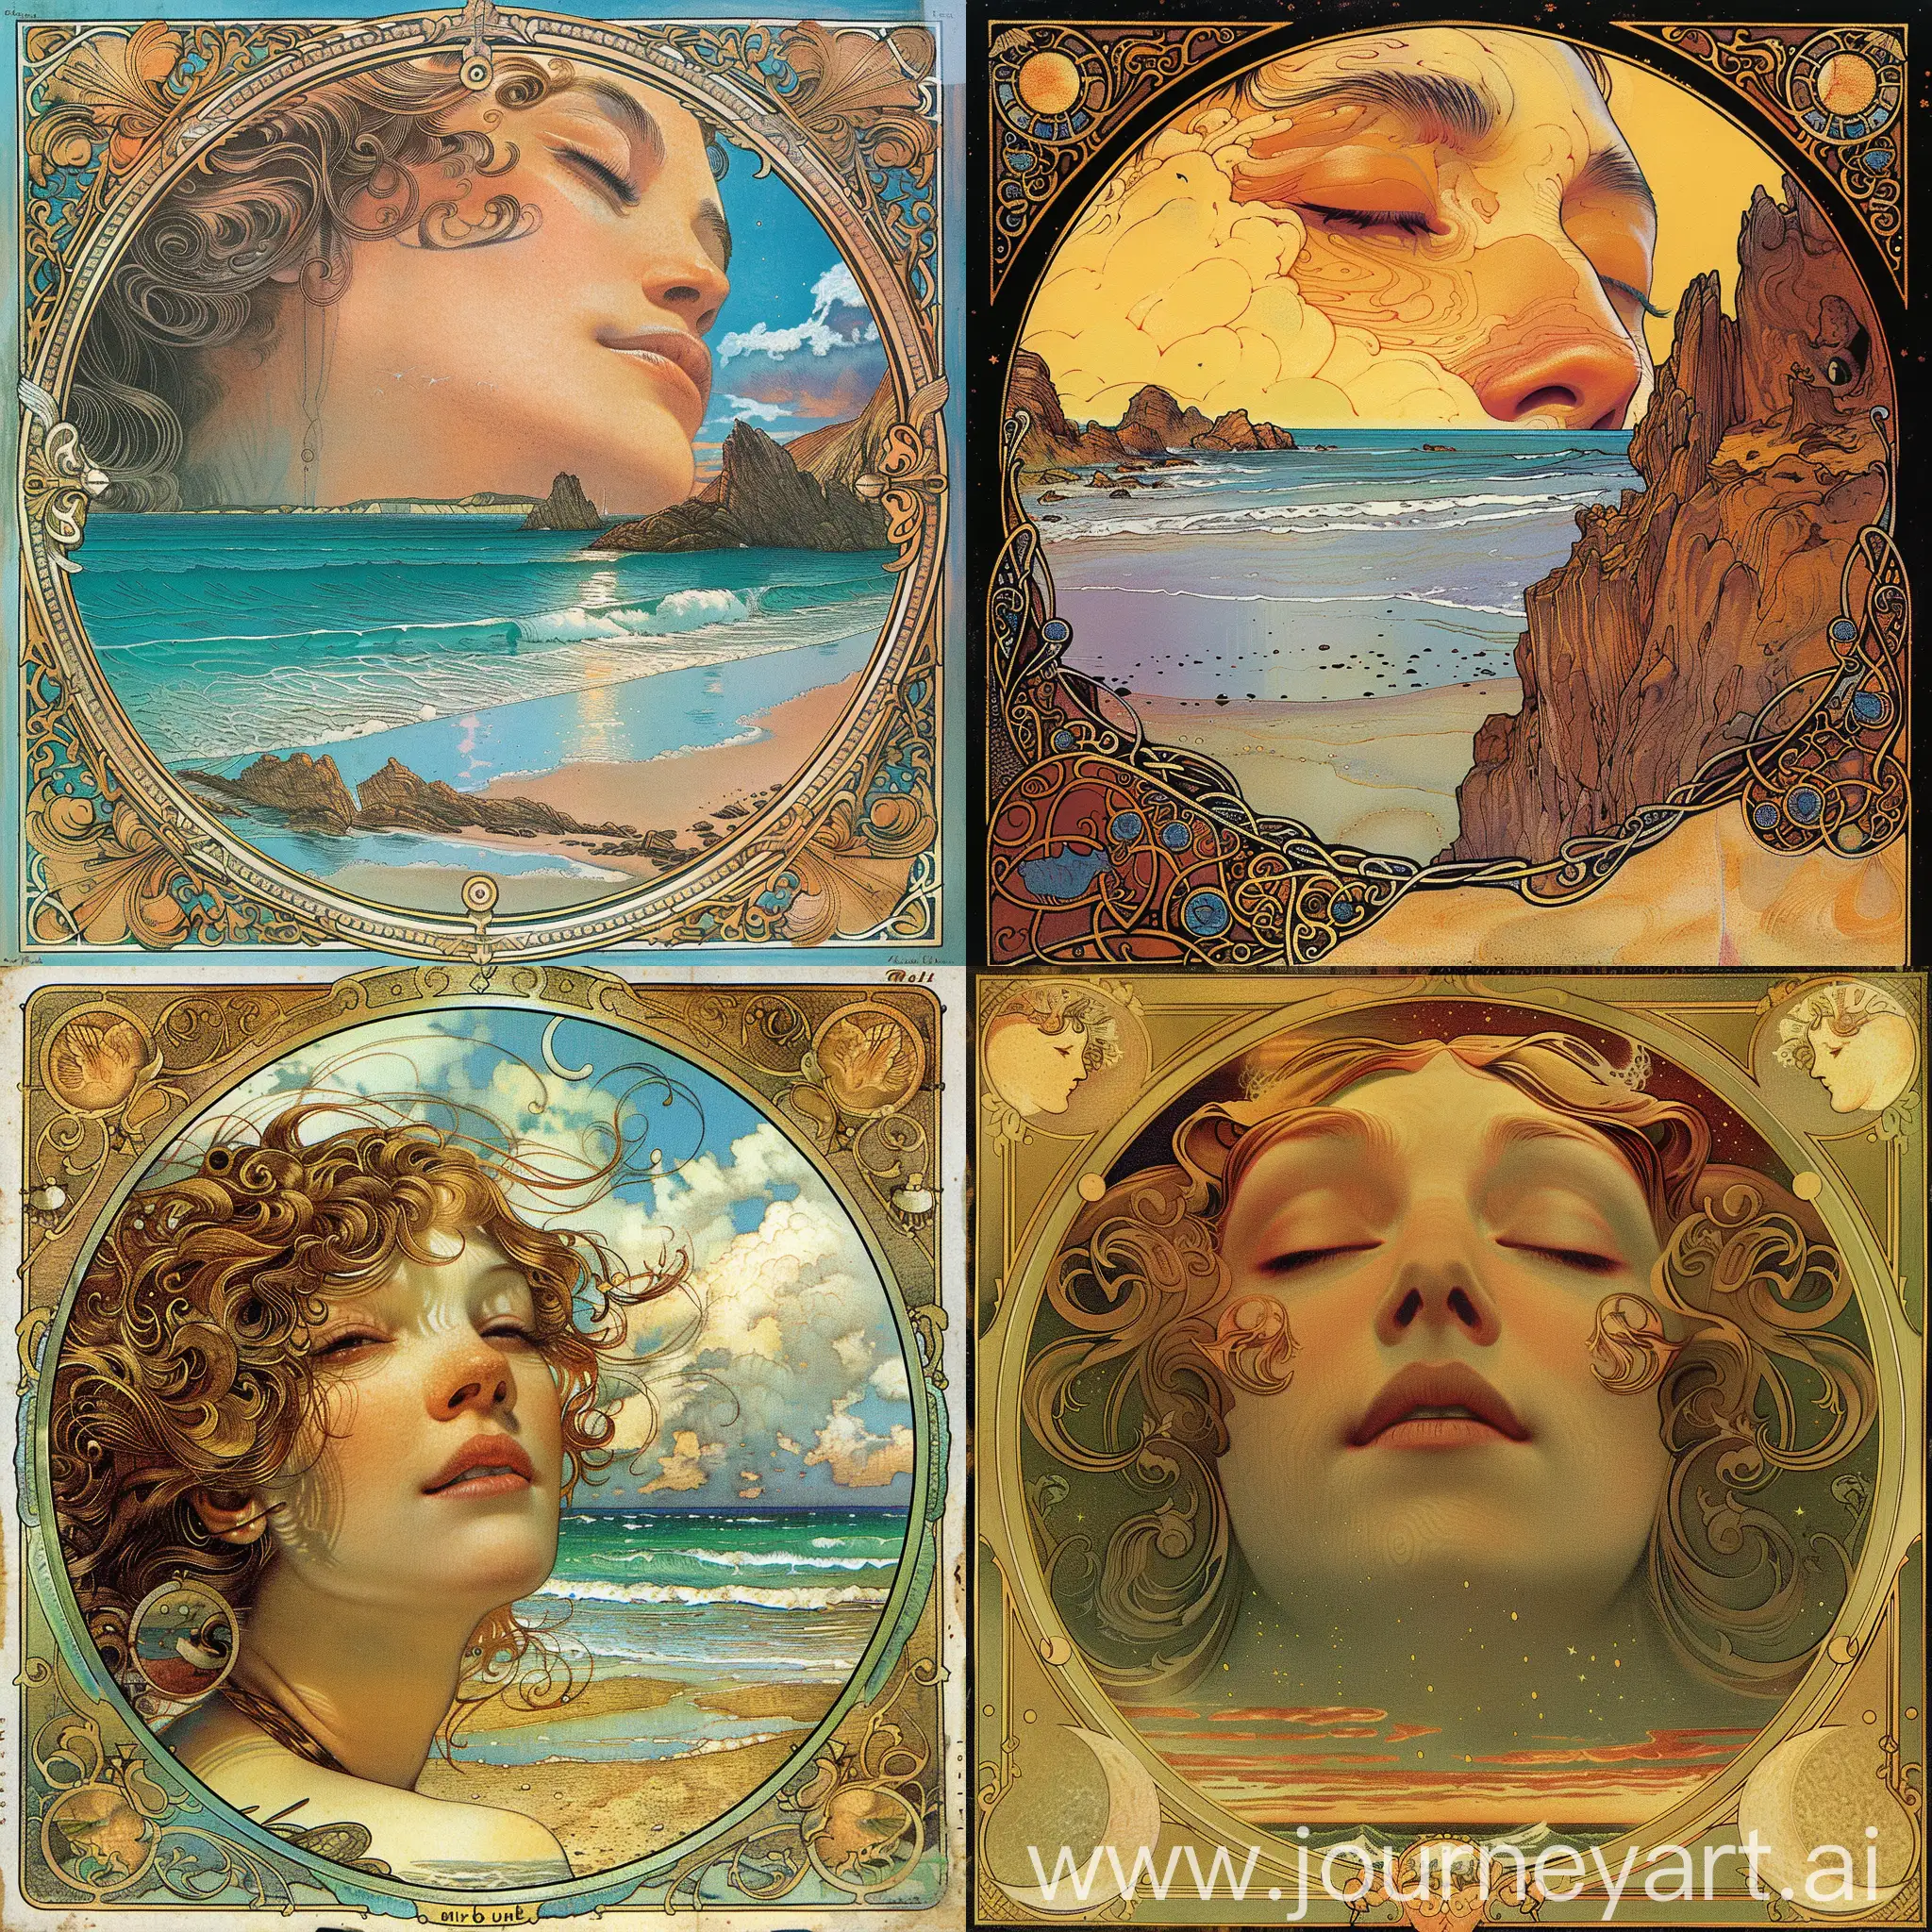 Heliocentric-Beach-Scene-with-Stunning-Face-Alphonse-Mucha-and-Maxfield-Parrish-Inspired-Illustration